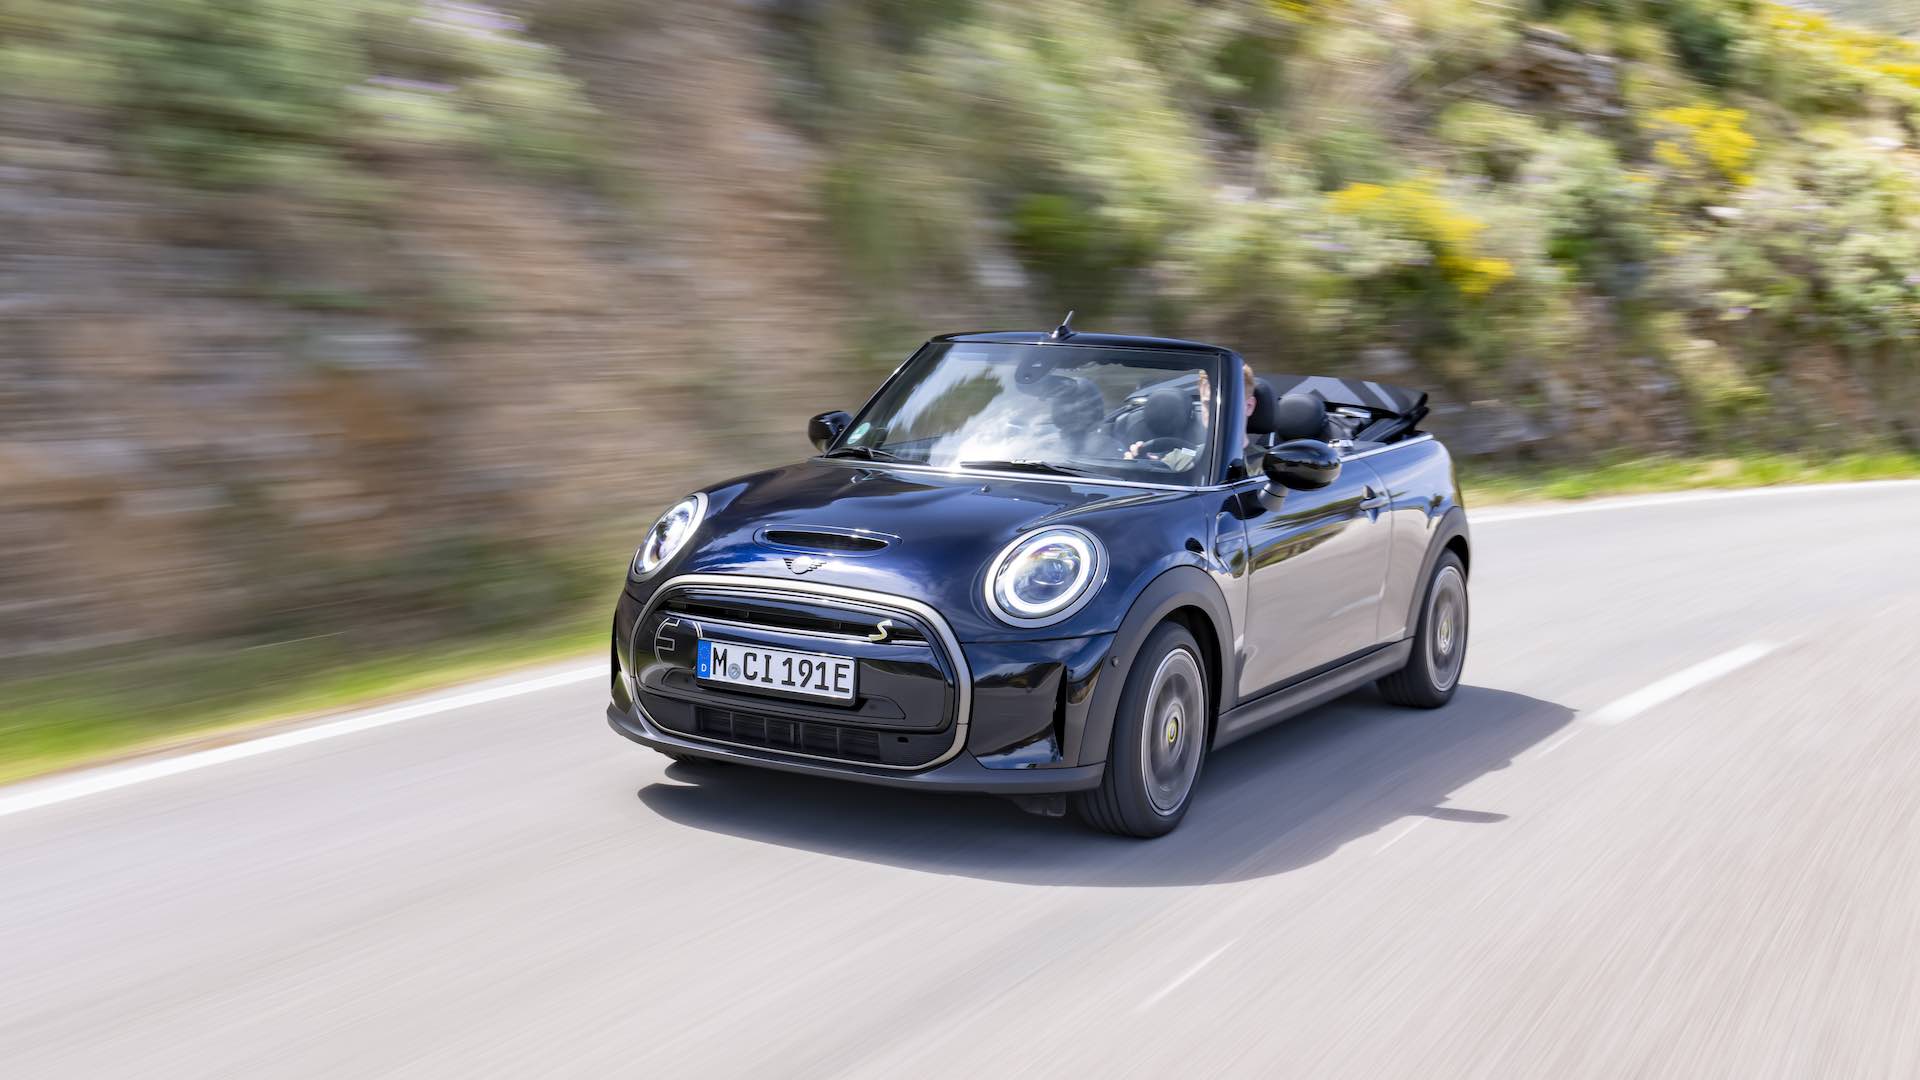 Drive stylishly green with the Mini Cooper SE convertible